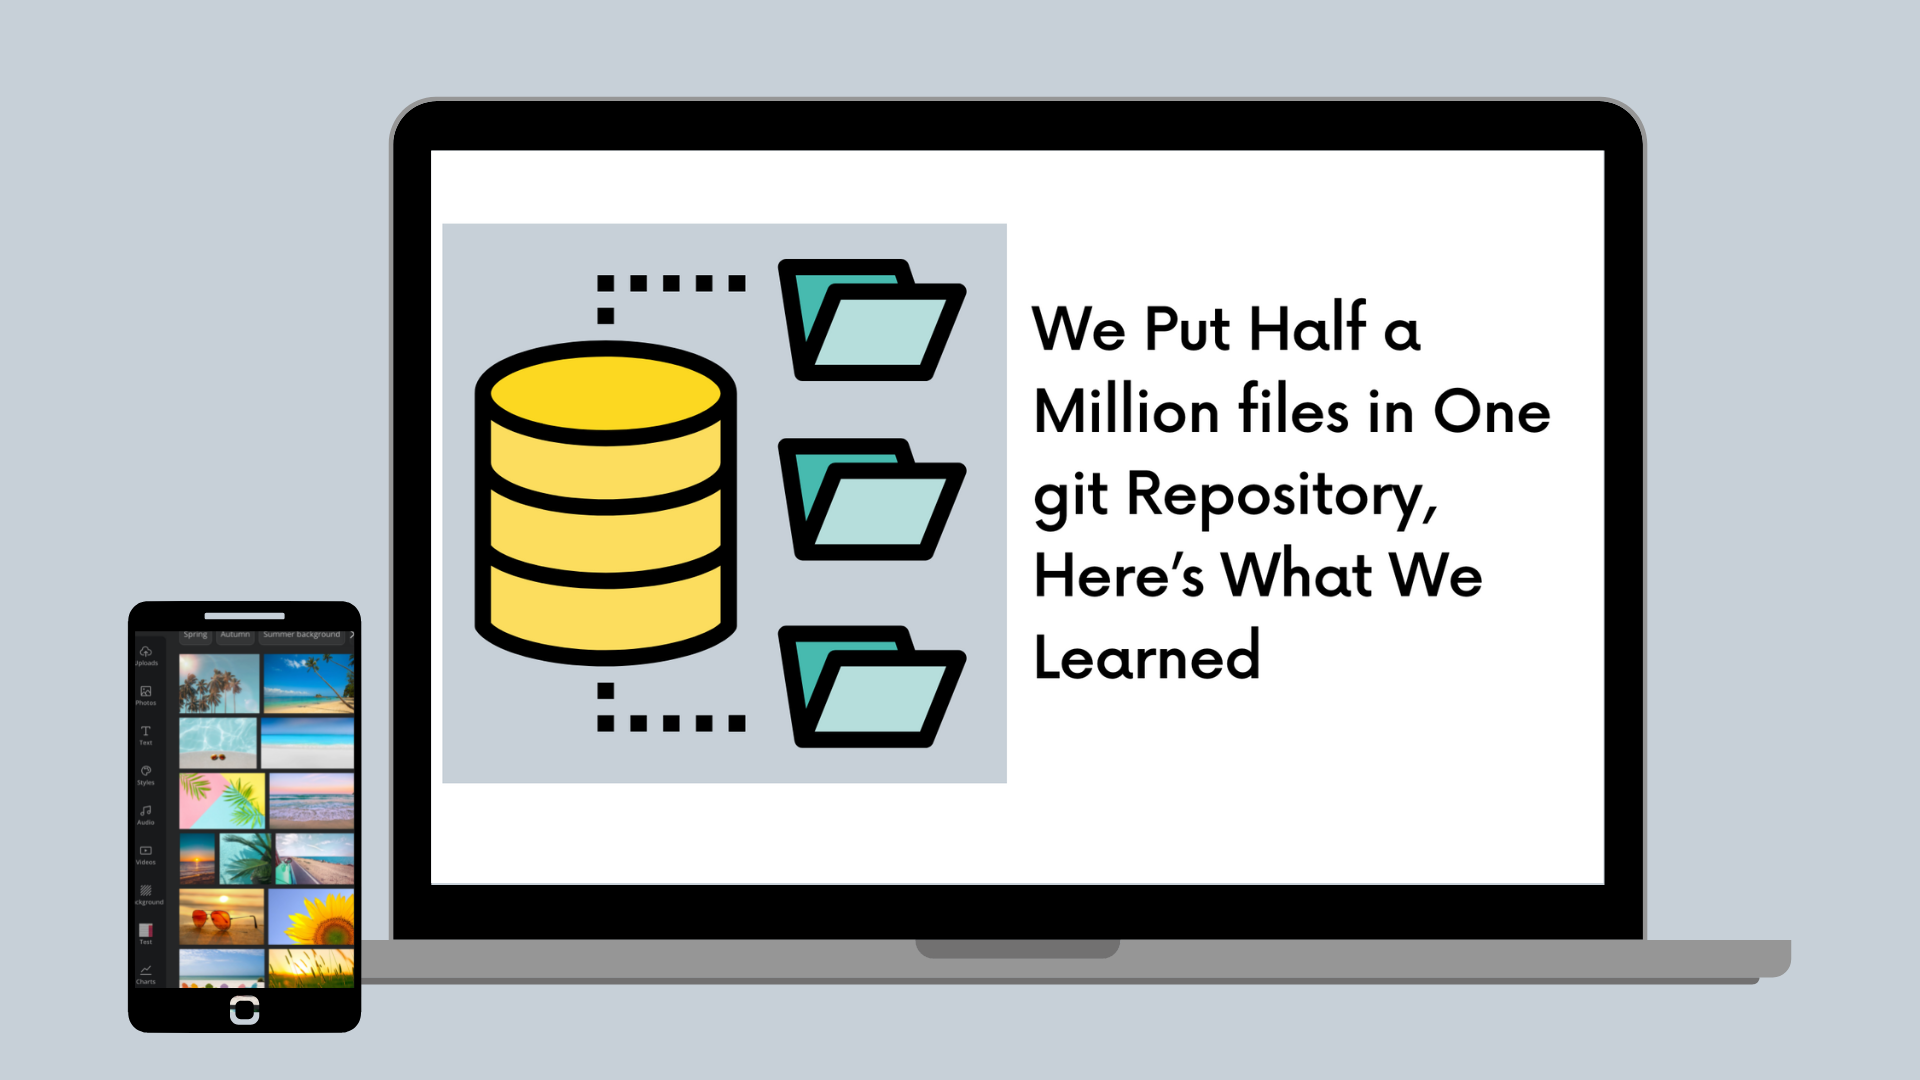 We Put Half a Million files in One git Repository, Here's What We Learned - Canva Engineering Blog